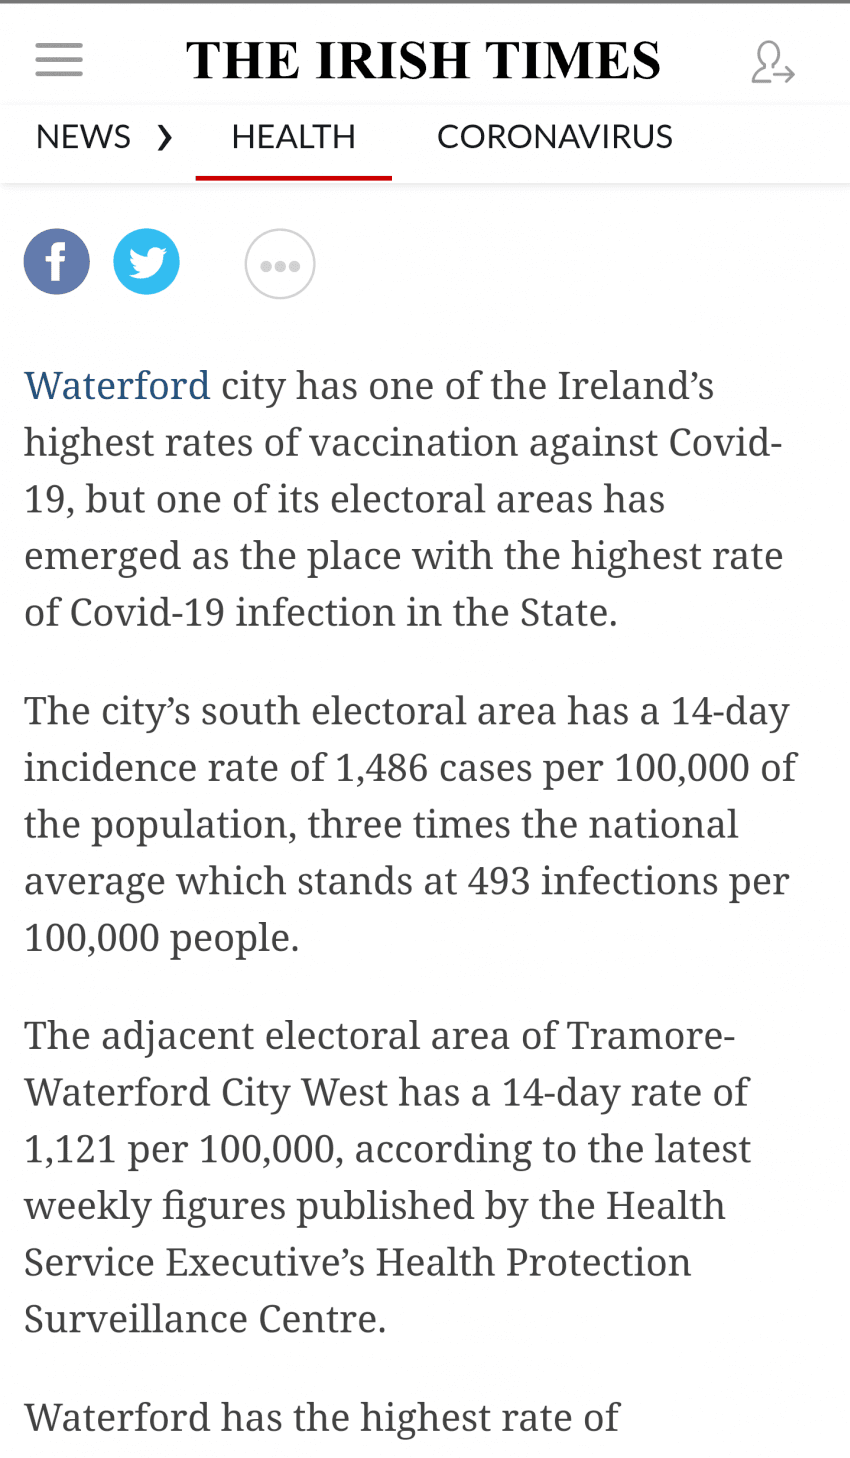 What's the status of an Irish city with a vaccination rate of 995.